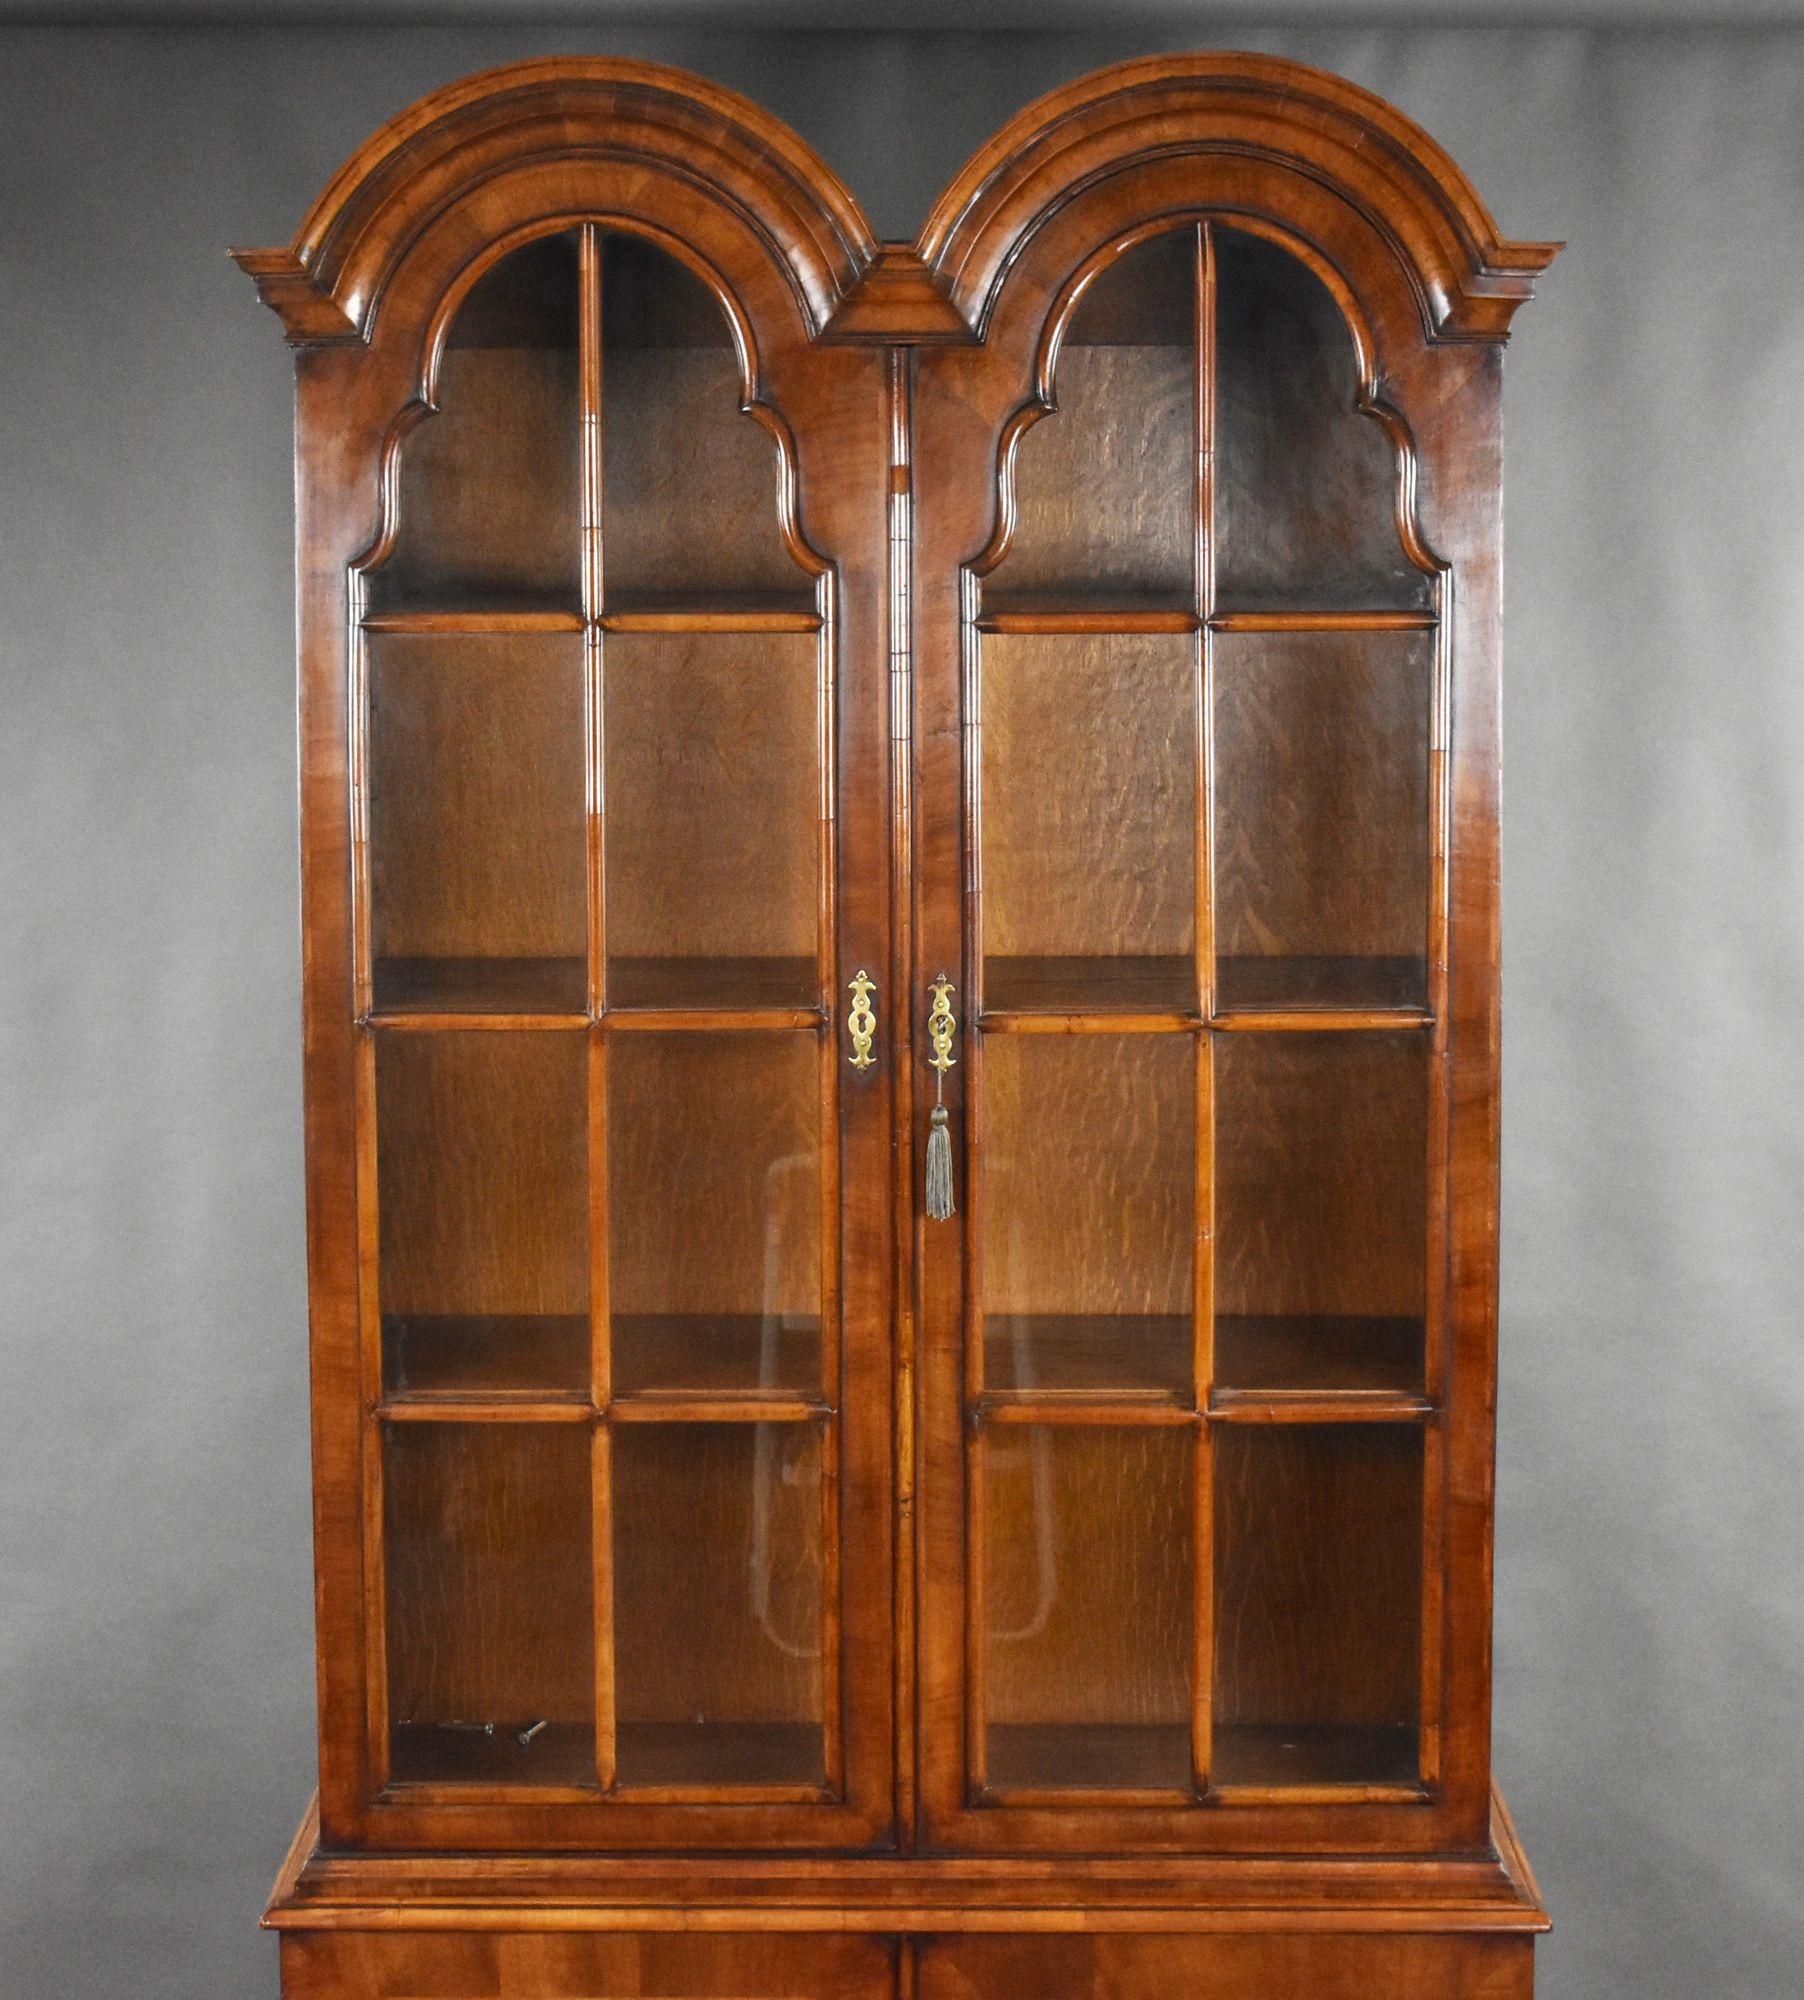 For sale is a good quality Queen Anne style antique burr walnut bookcase, having a double dome top with cross grain mouldings, above two glazed doors opening to two shelves, above a base with cross banded doors and herringbone inlay, raised on ogee